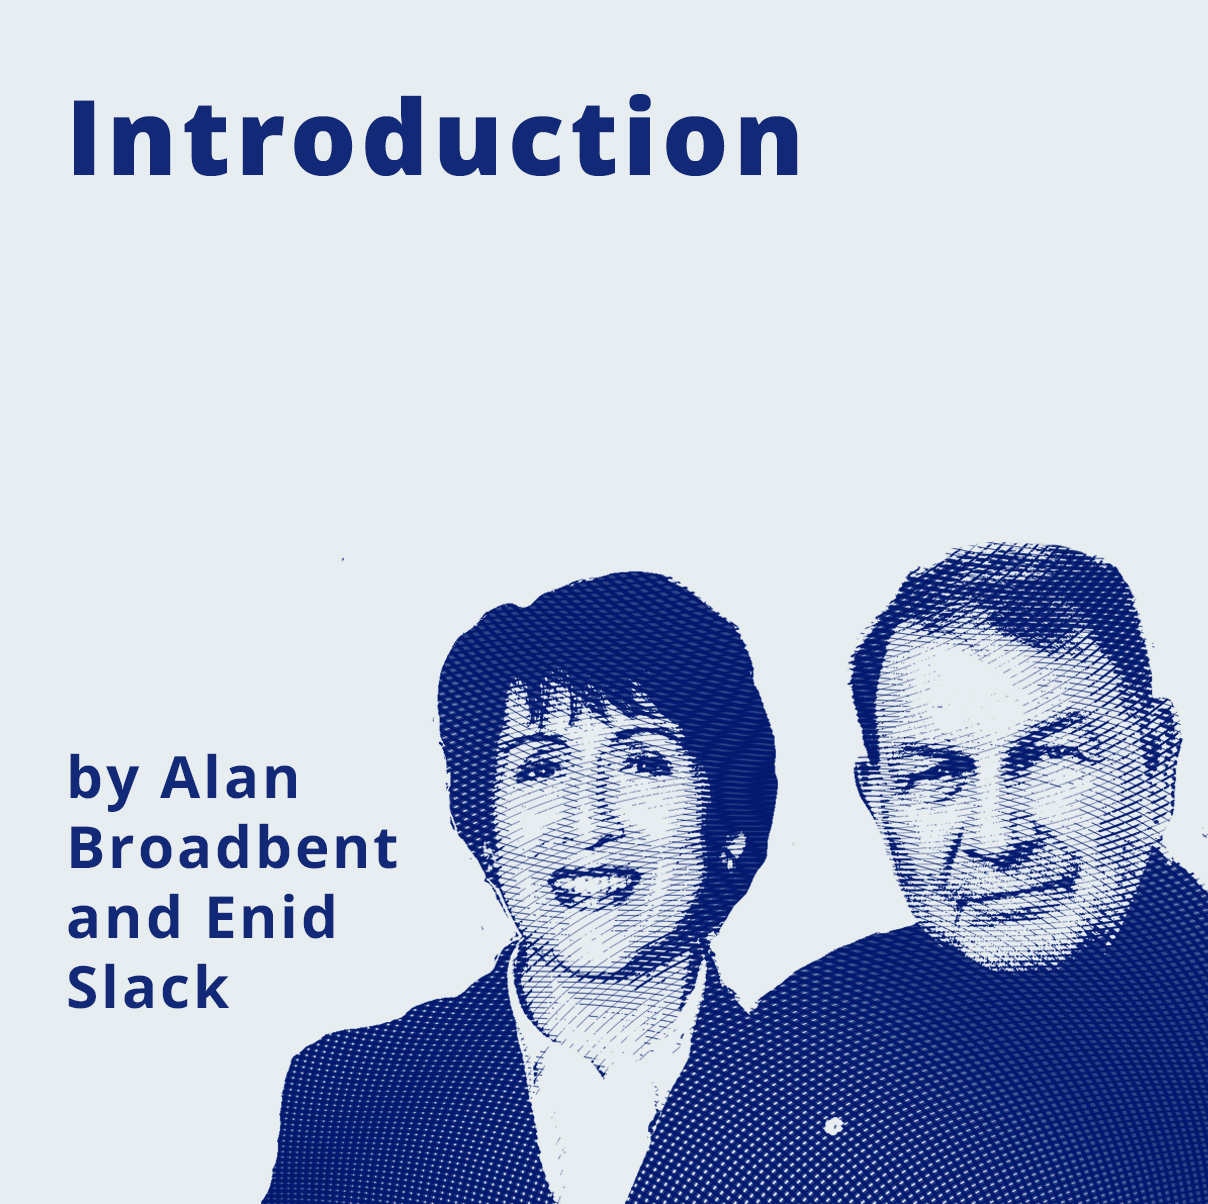 Introduction by Alan Broadbent and Enid Slack